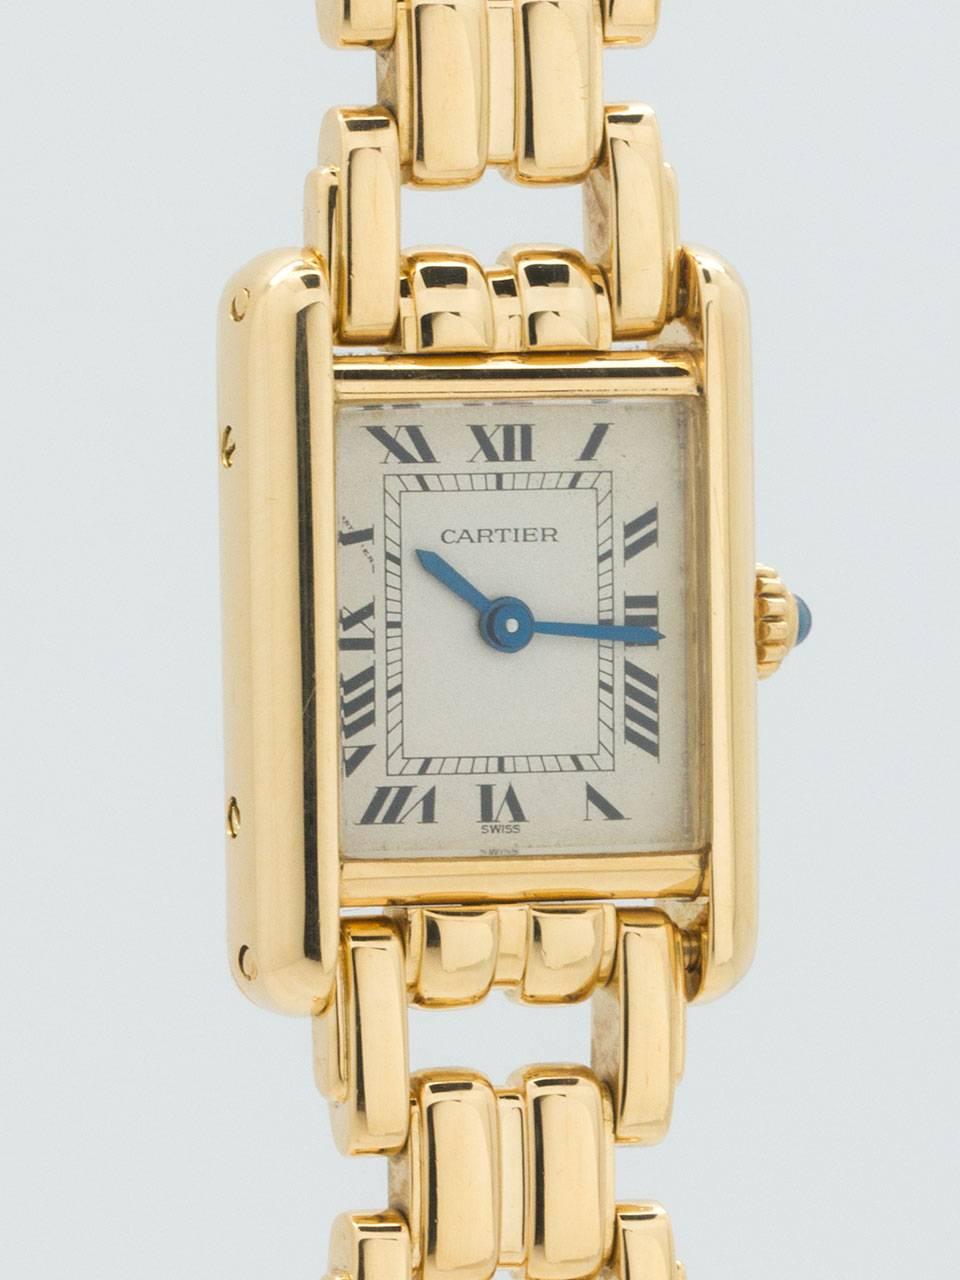 Lady Cartier Tank Louis Mini 18K YG with Bracelet circa 1990s. Mini size lady Tank Louis with acrylic crystal and cabochon sapphire crown. Soft white dial with printed black Roman numerals and blue steeled hands. Powered by quartz movement. With